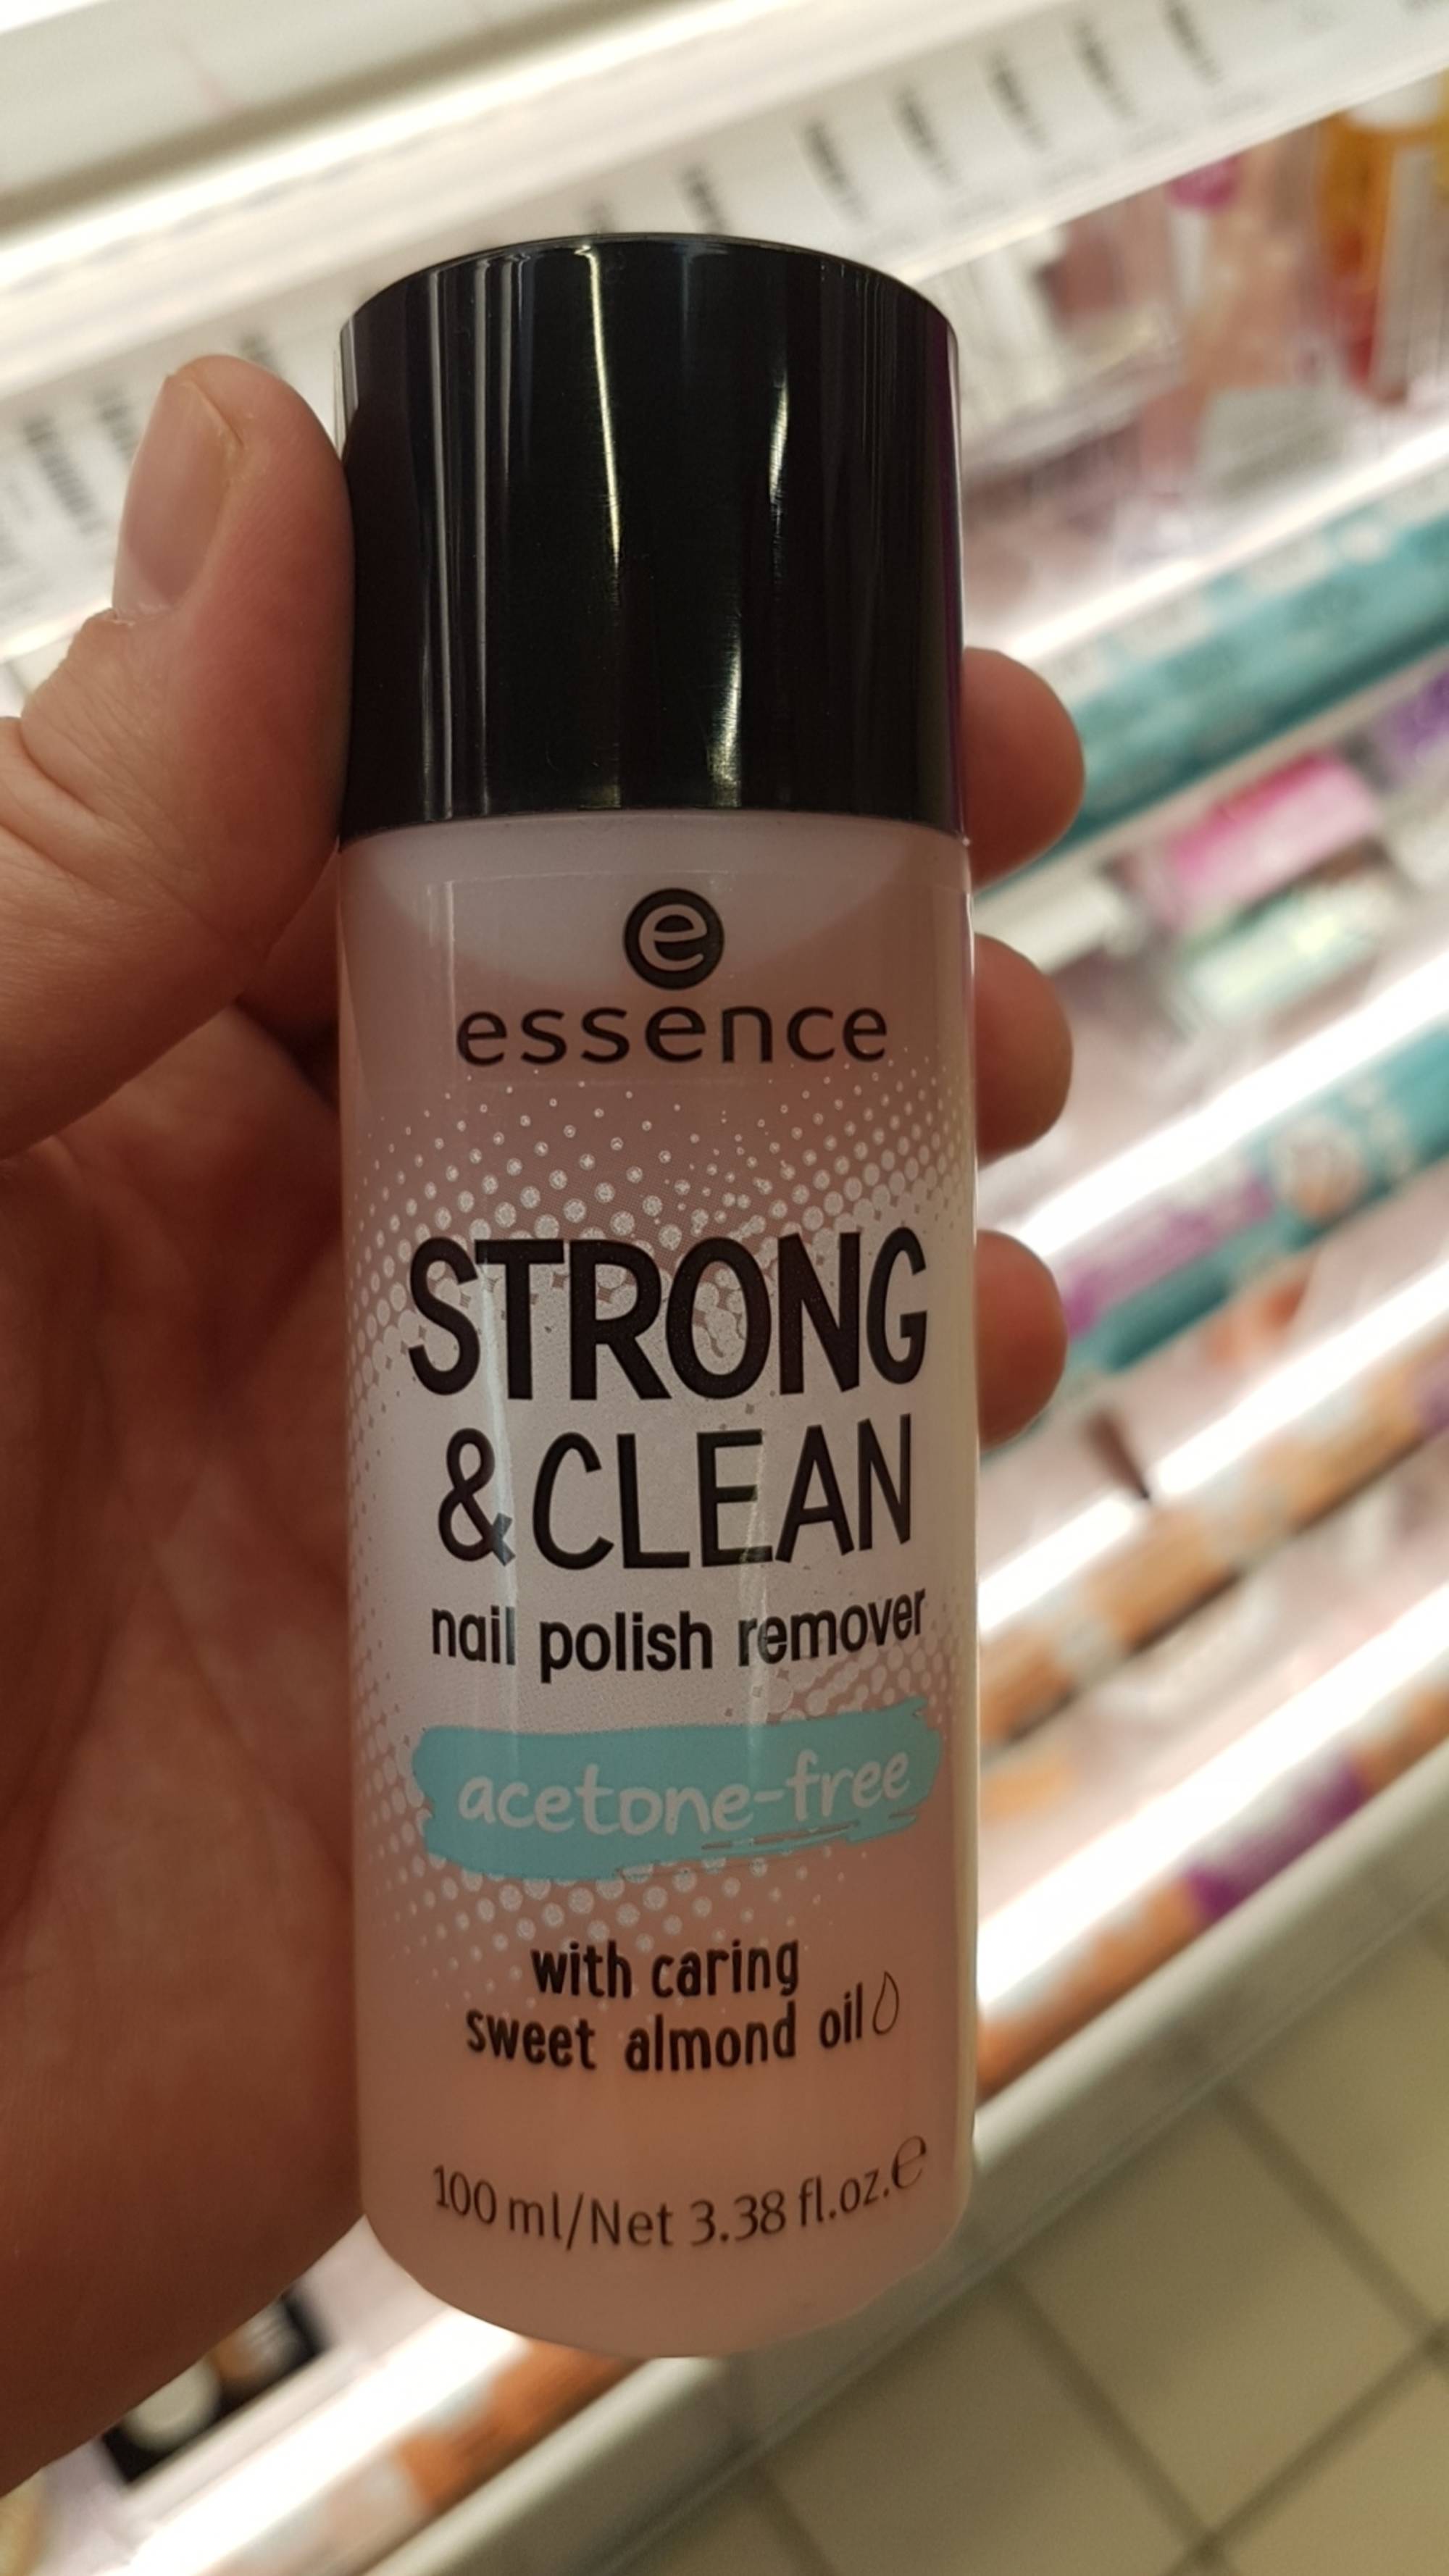 ESSENCE - Strong & clean - Nail polish remover